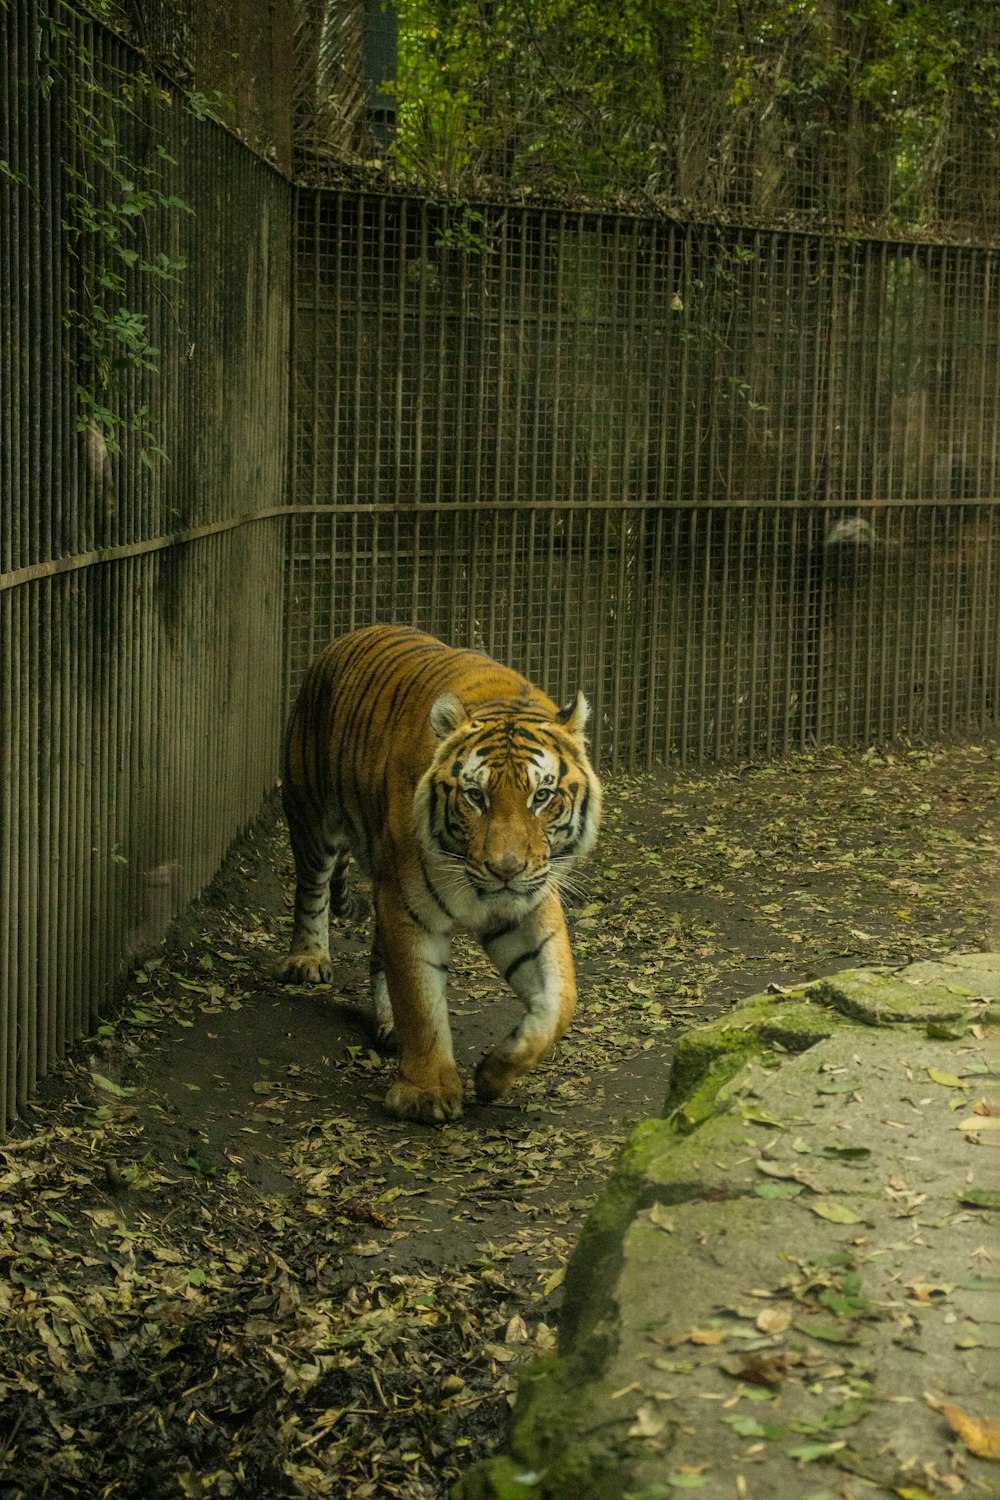 a tiger is walking around in a cage